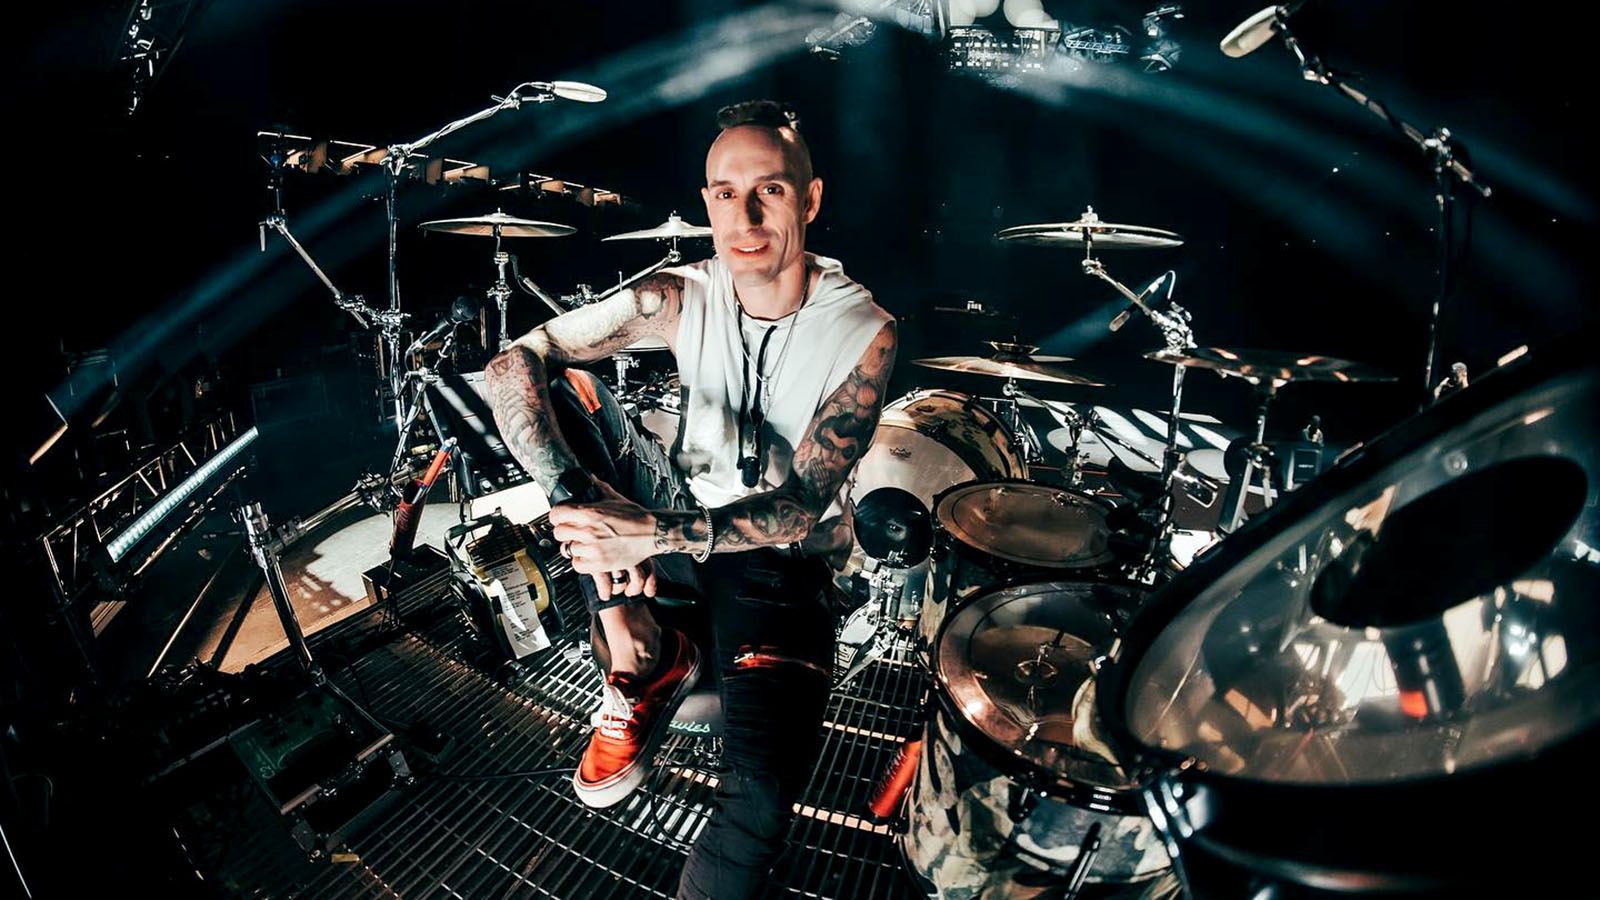 Frank Zummo will offer a free drumming workshop at Sweetwater Sound on Nov. 18.